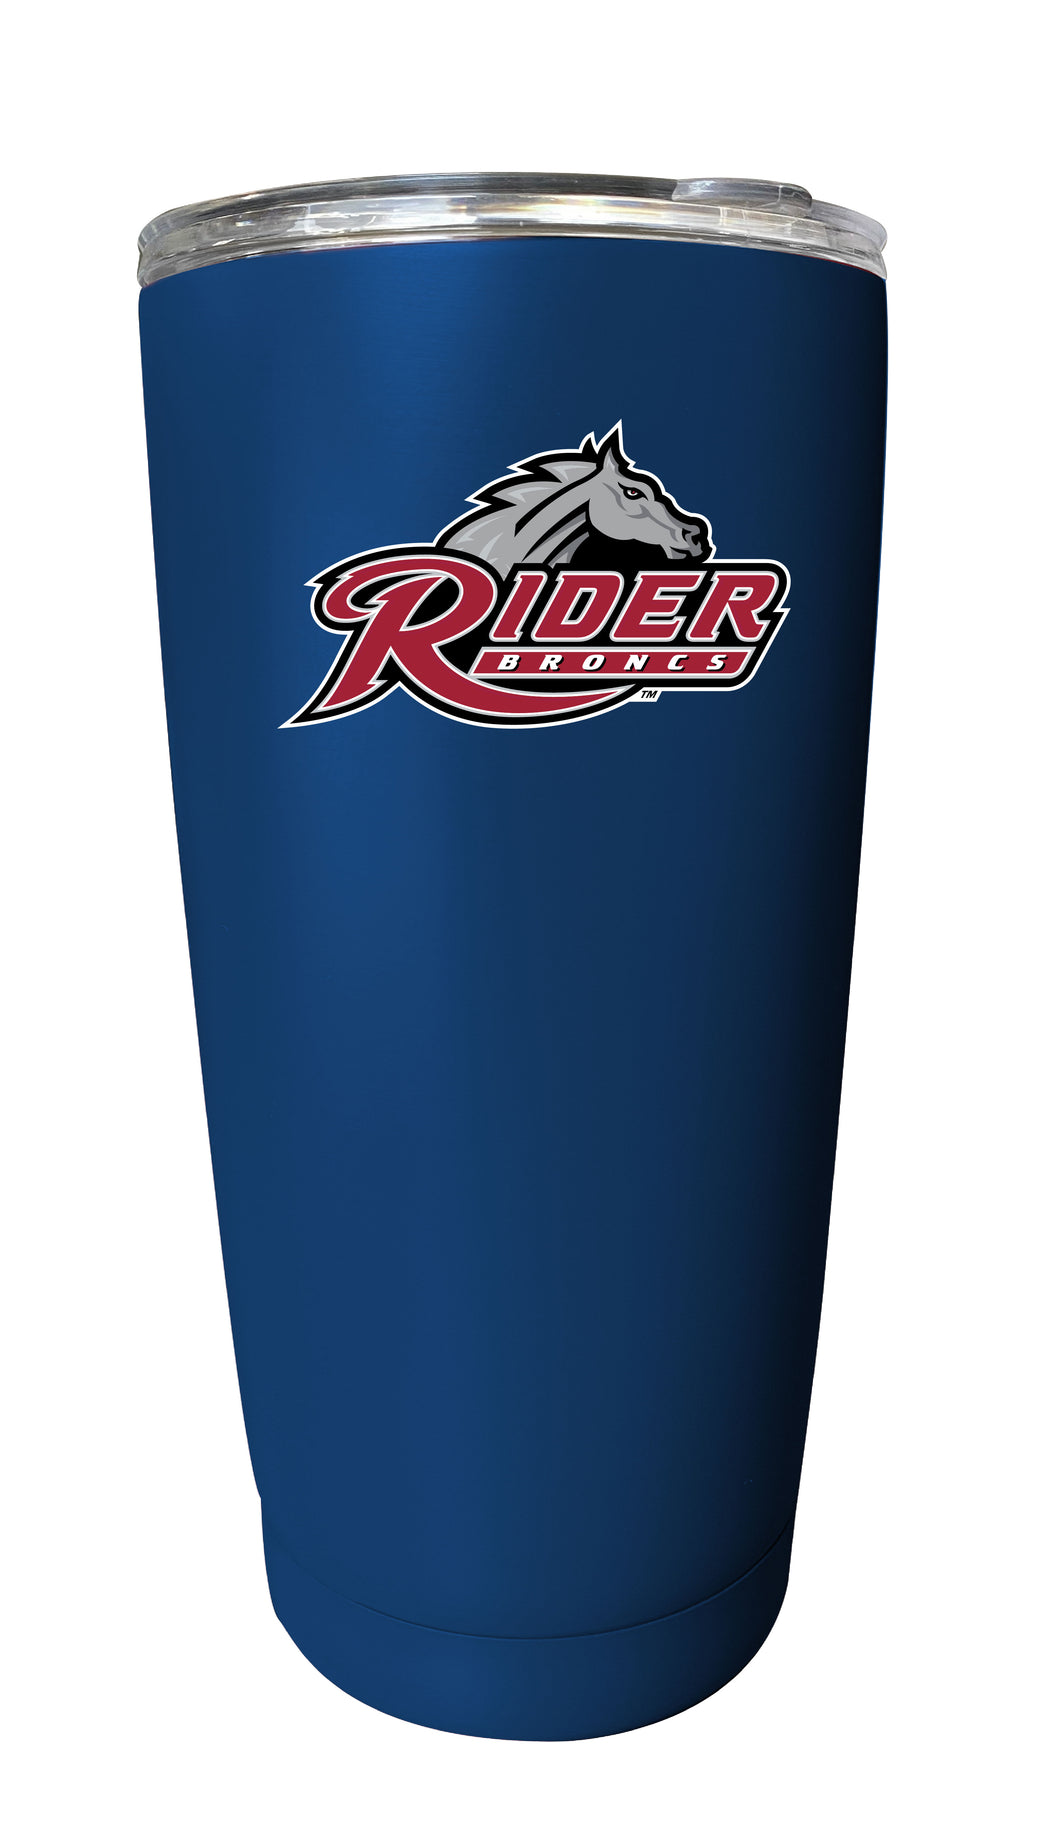 Rider University Broncs 16 oz Insulated Stainless Steel Tumbler - Choose Your Color.